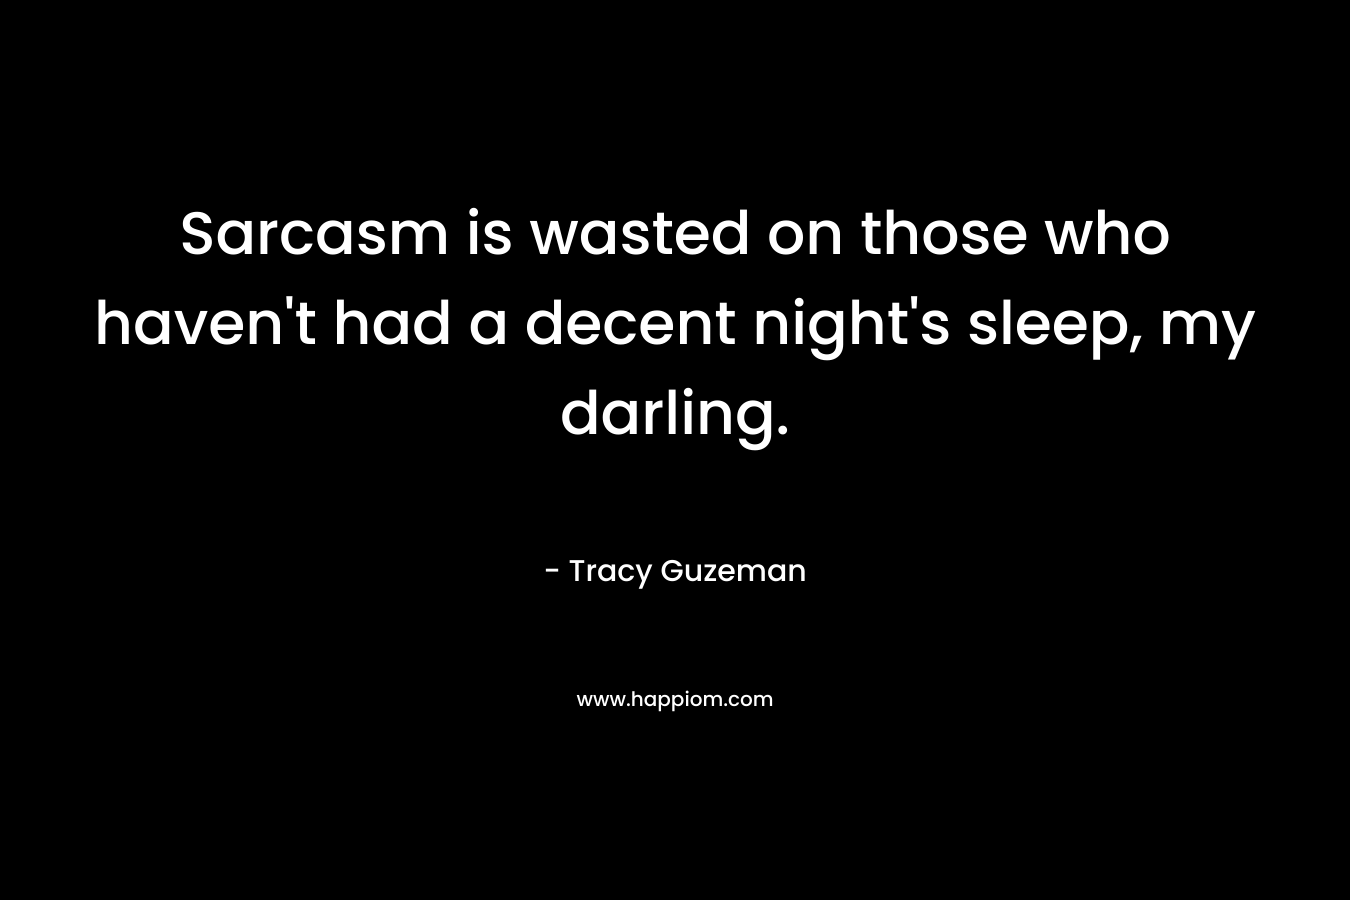 Sarcasm is wasted on those who haven’t had a decent night’s sleep, my darling. – Tracy Guzeman